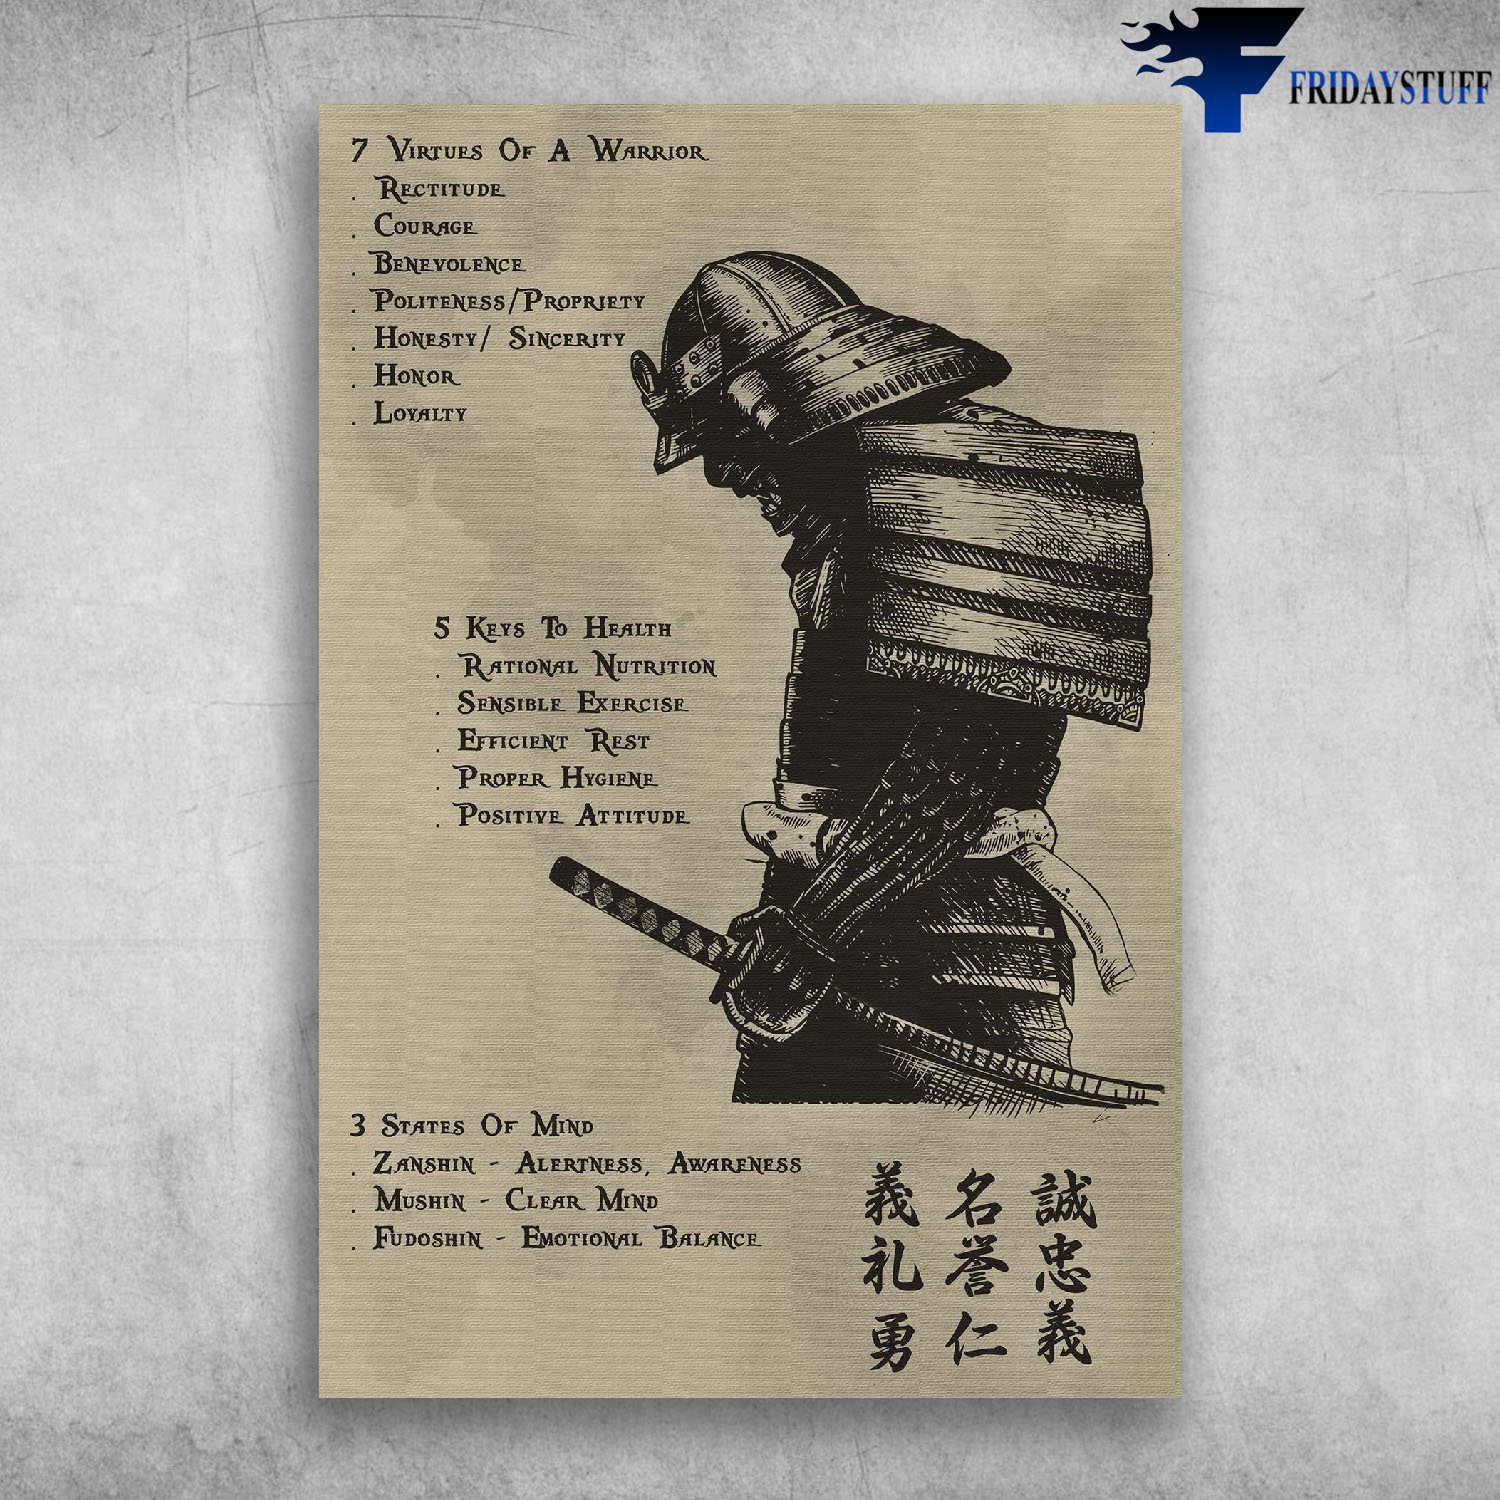 7-5-3 Code Of Samurai 7 Virtues Of A Warrior 5 keys To Health 3 States Of Mind